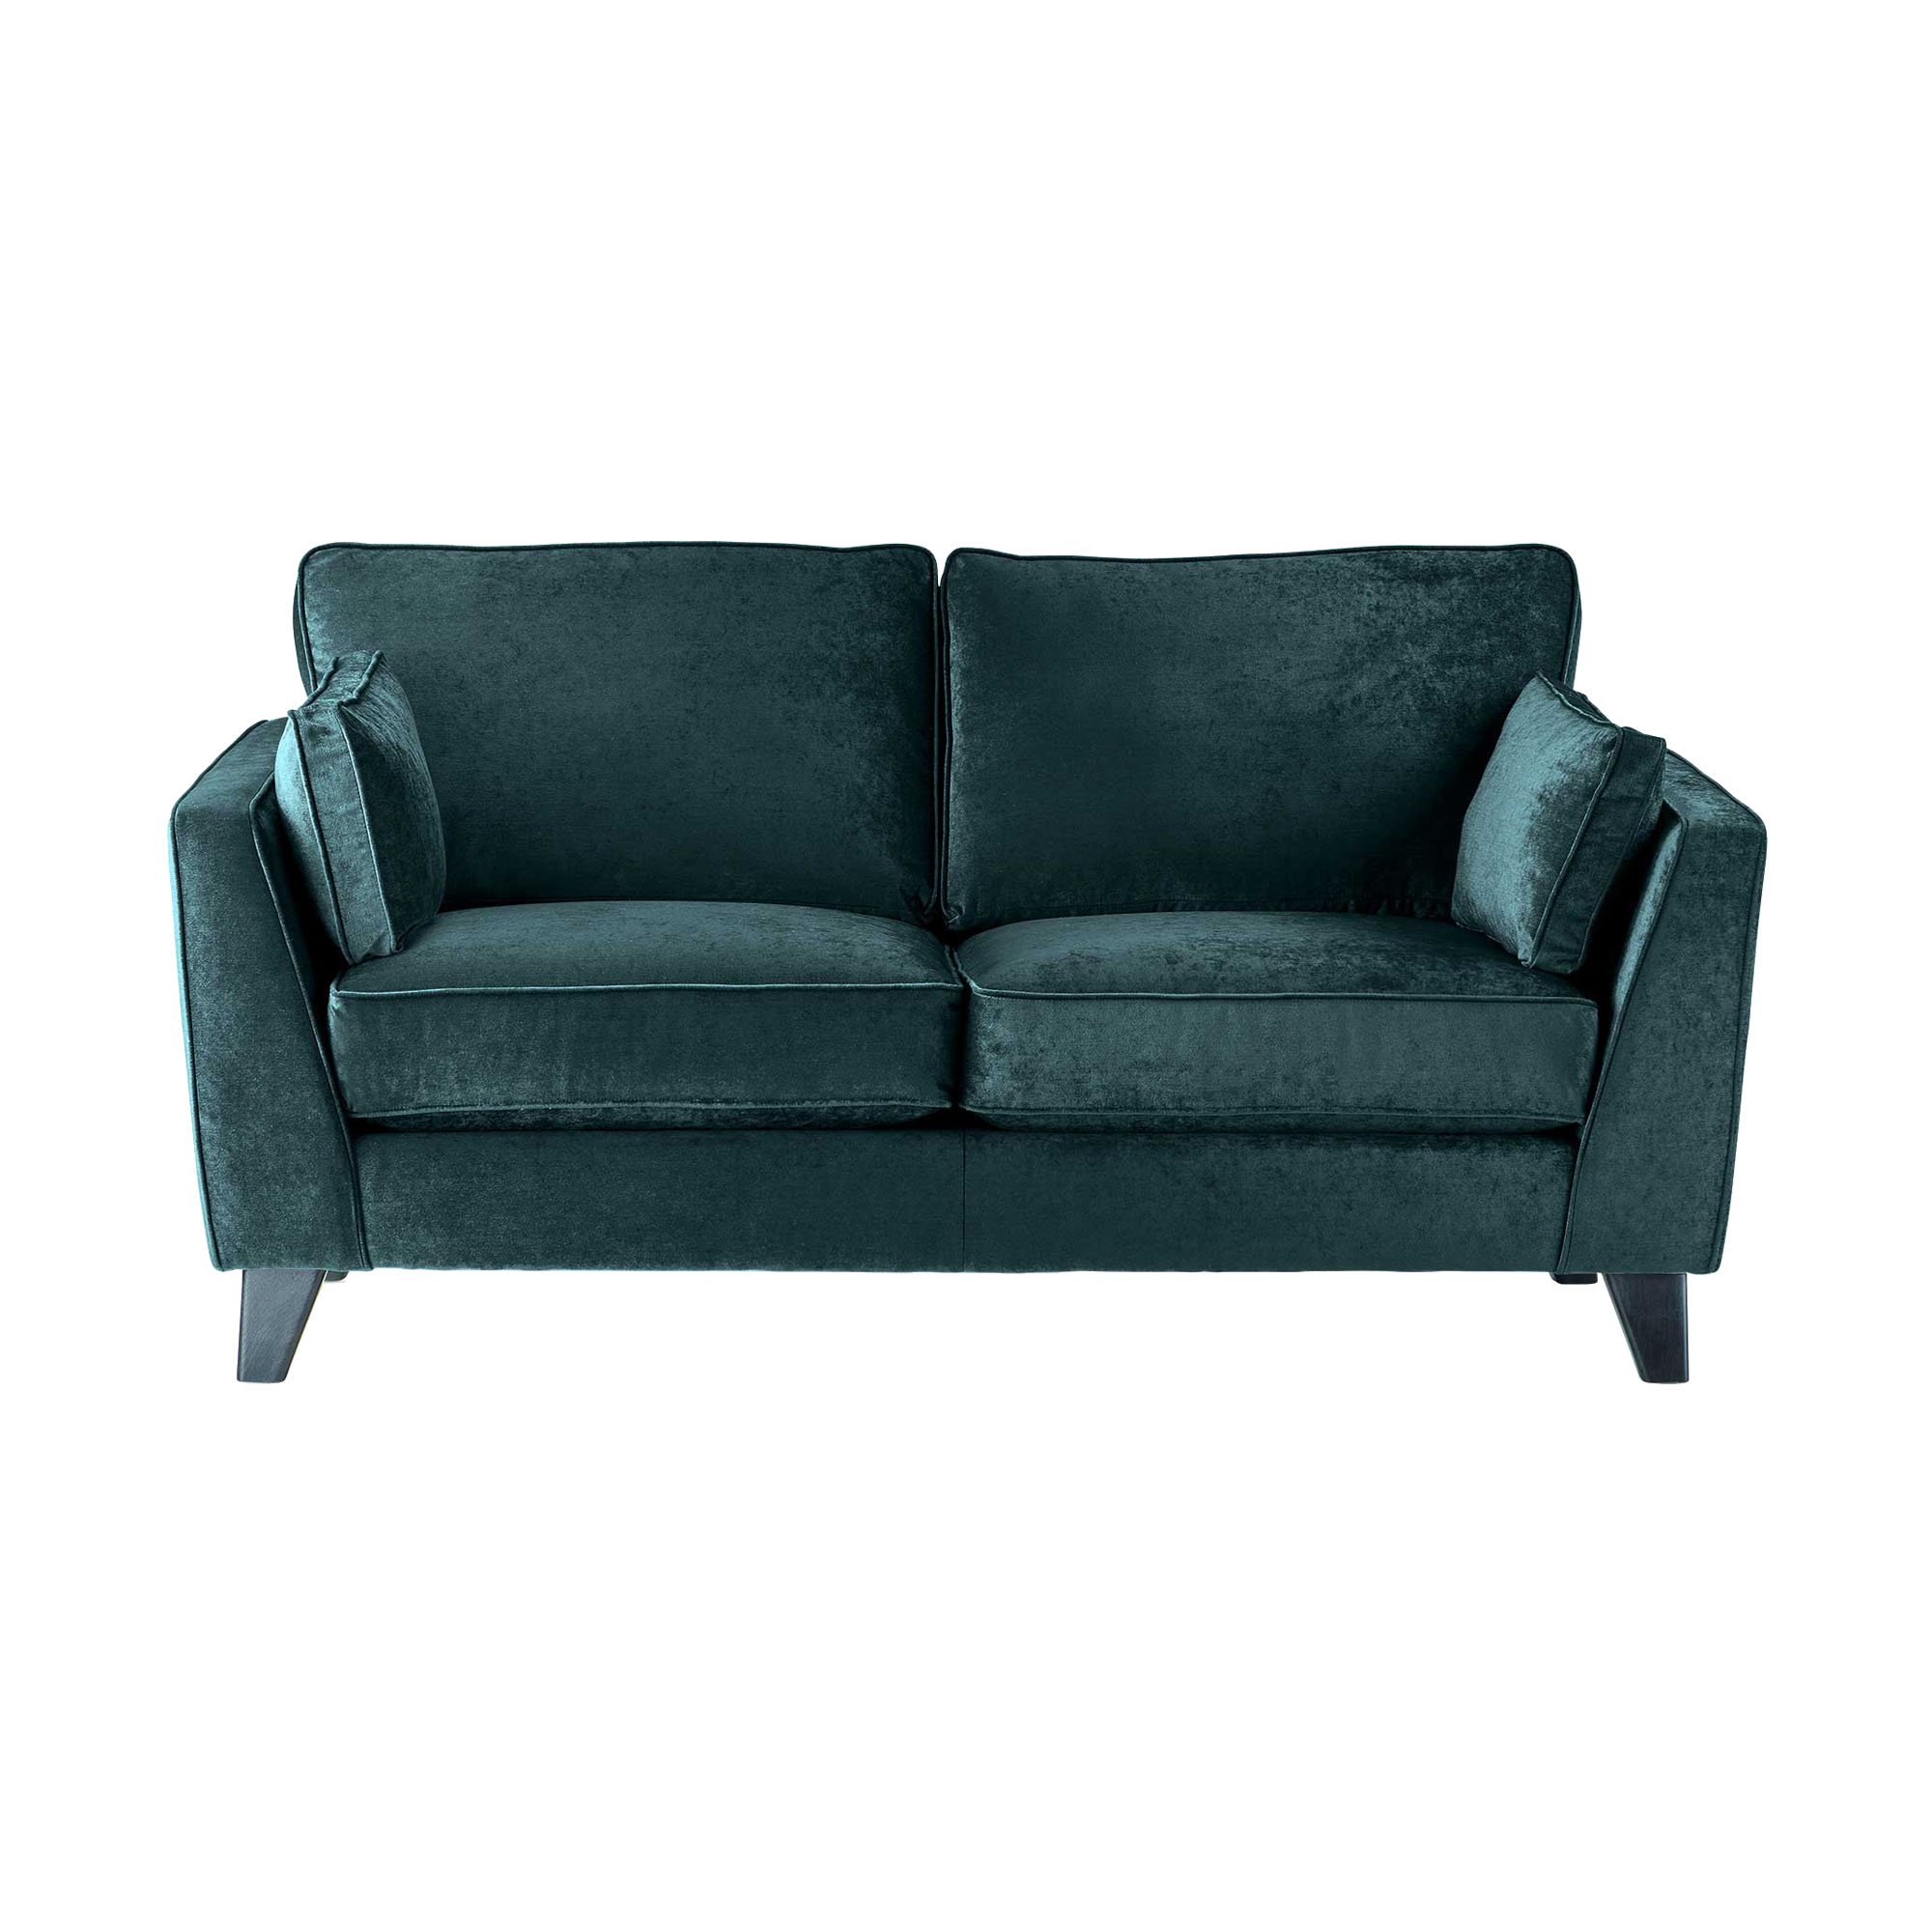 Rene 2 Seater Sofa Without Scatters, Green Fabric | Barker & Stonehouse